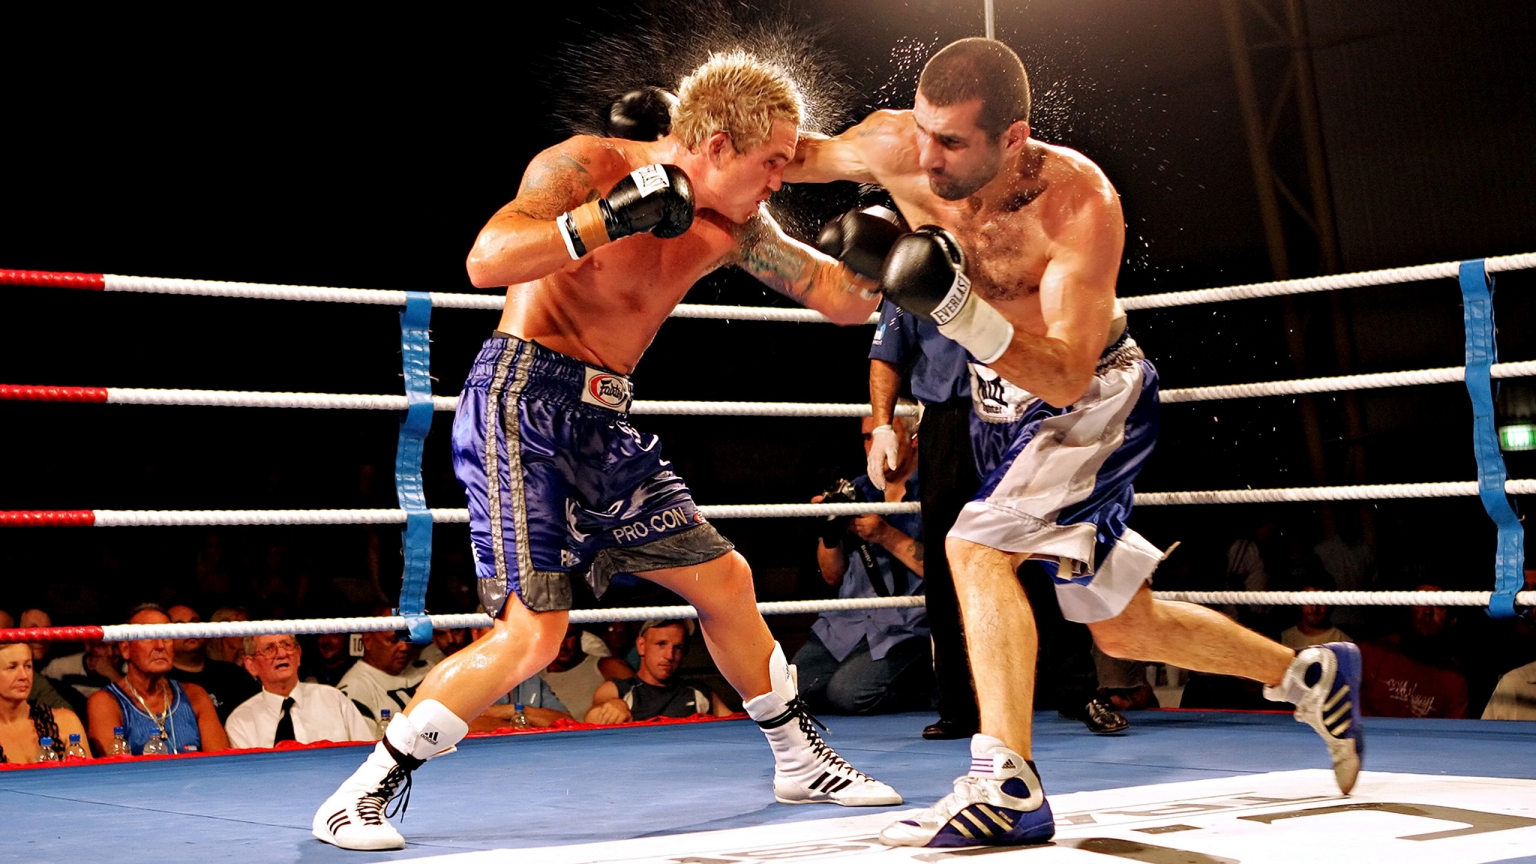 On boxing ring for 1536 x 864 HDTV resolution